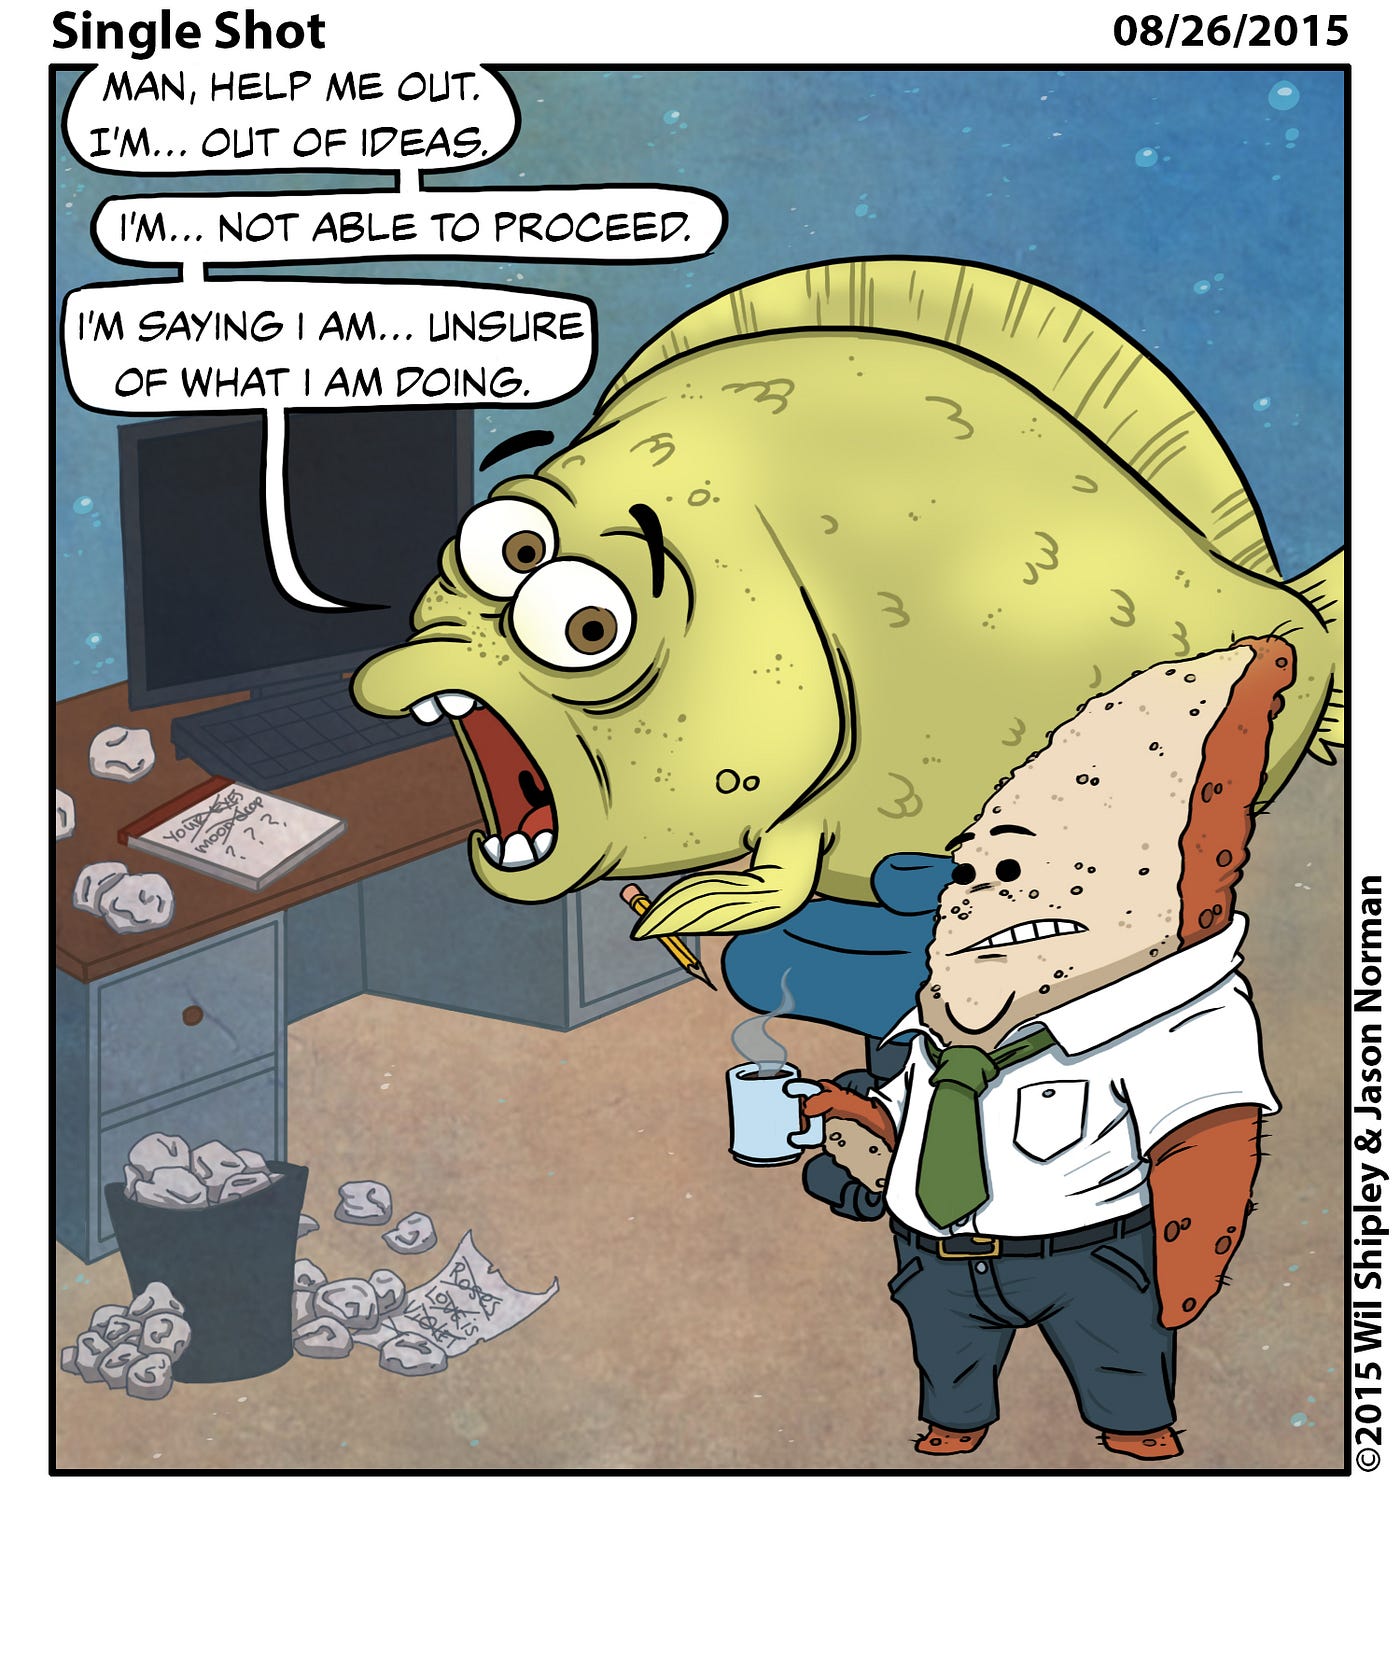 Fish puns are the real lowest form of humor, by Wil Shipley